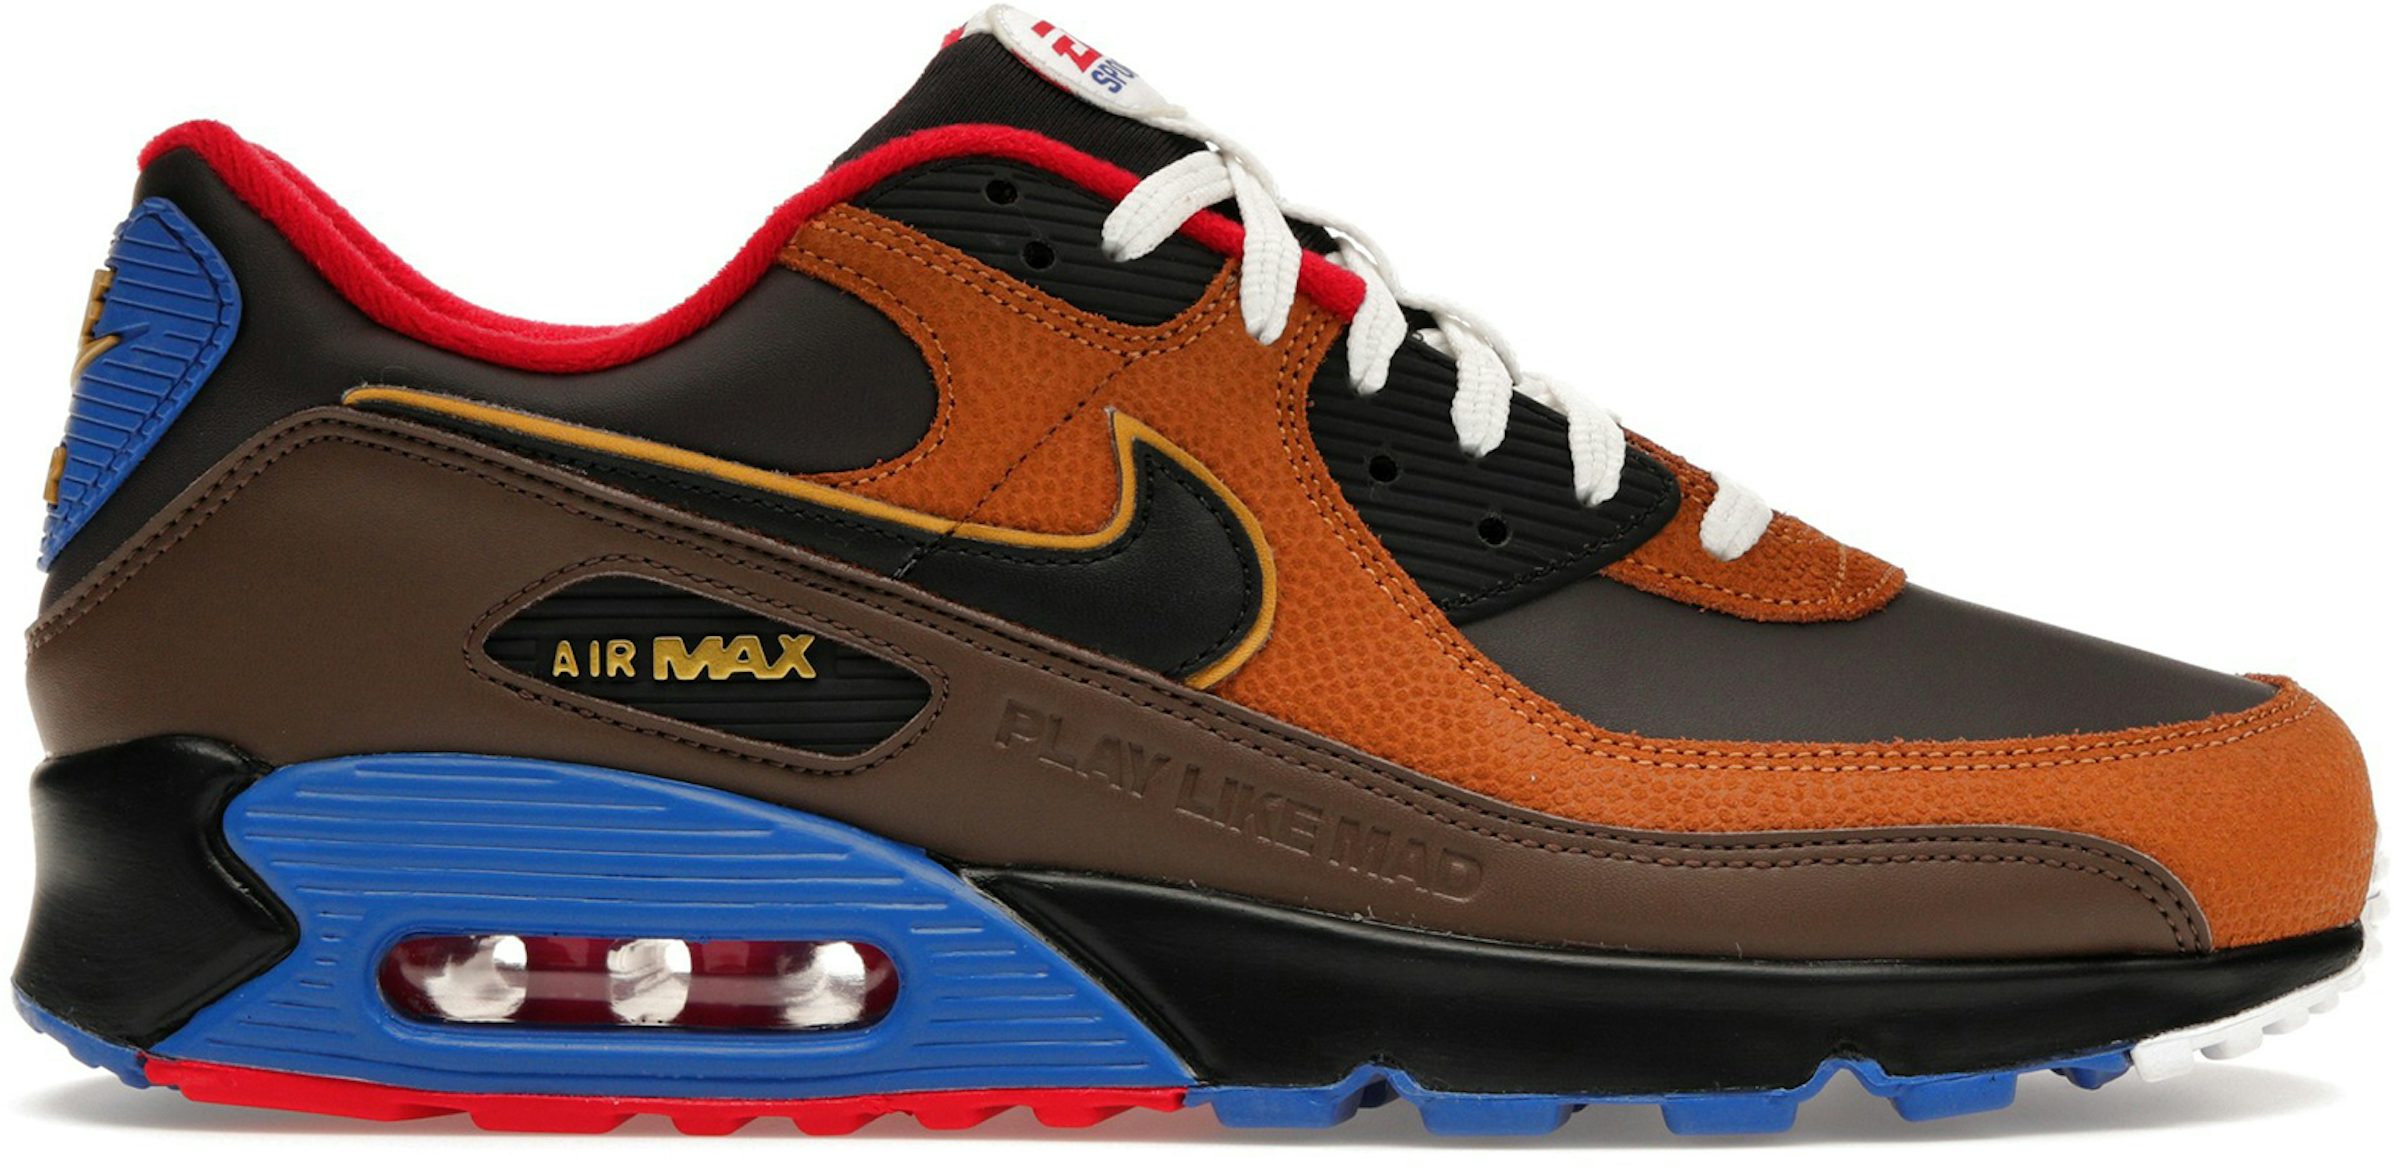 grave ovn Mainstream Air Max 90 - All Sizes & Colorways at StockX